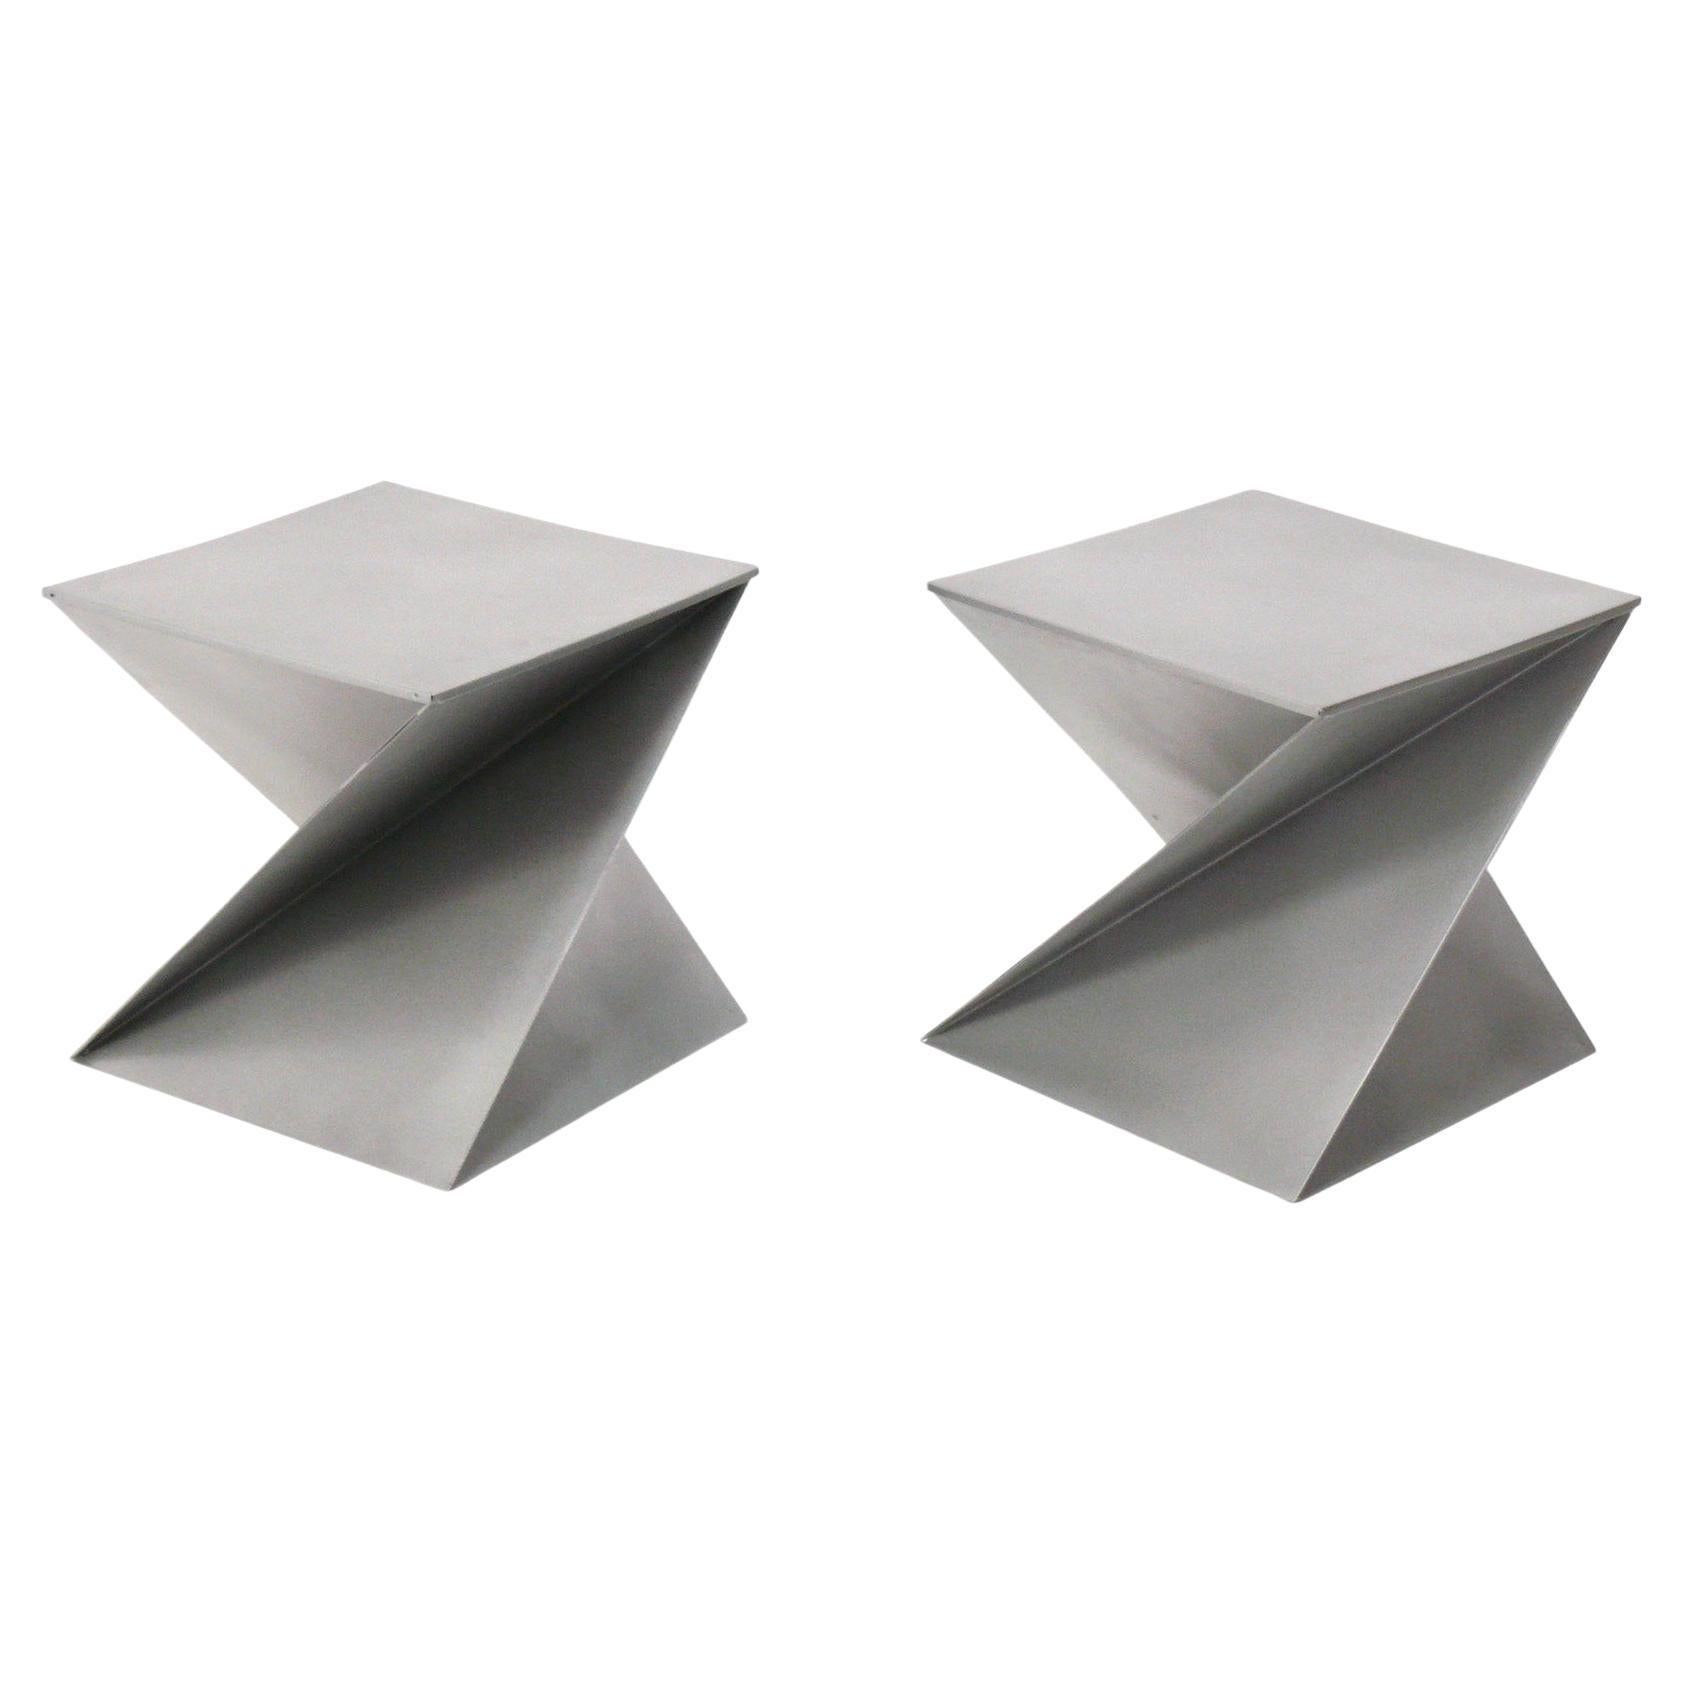 Pair of Sculptural Origami Folded Metal End Tables For Sale at 1stDibs